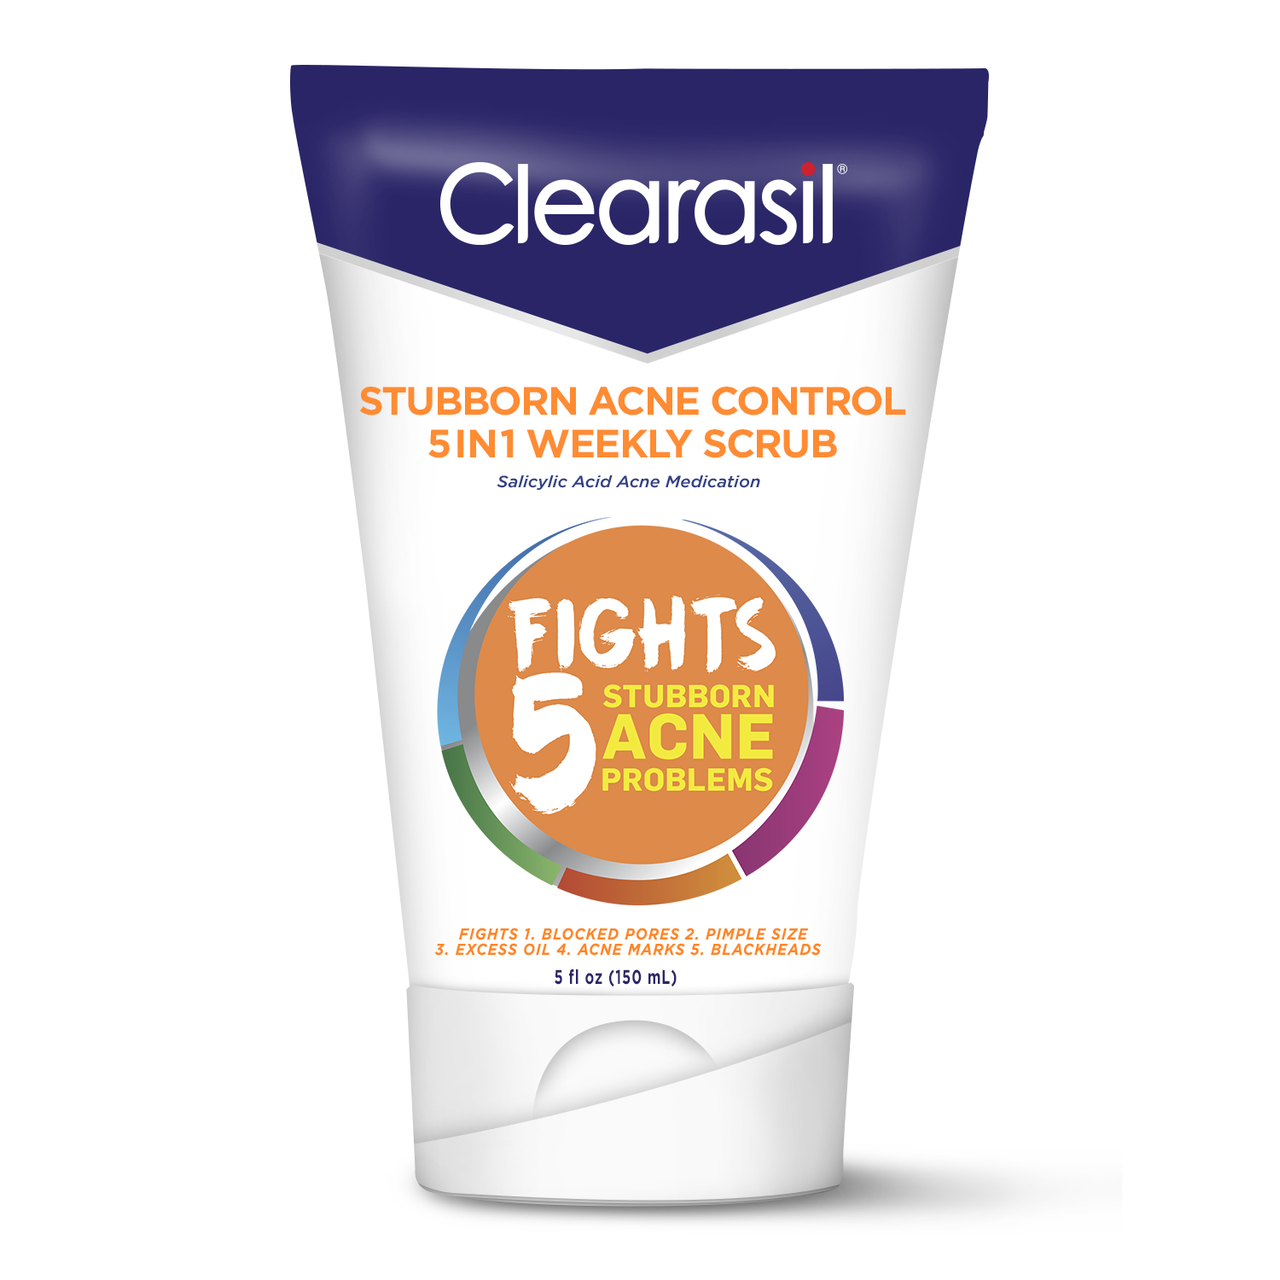 Clearasil%20Stubborn%20Acne%20Control%205in1%20Weekly%20Scrub_V02.png